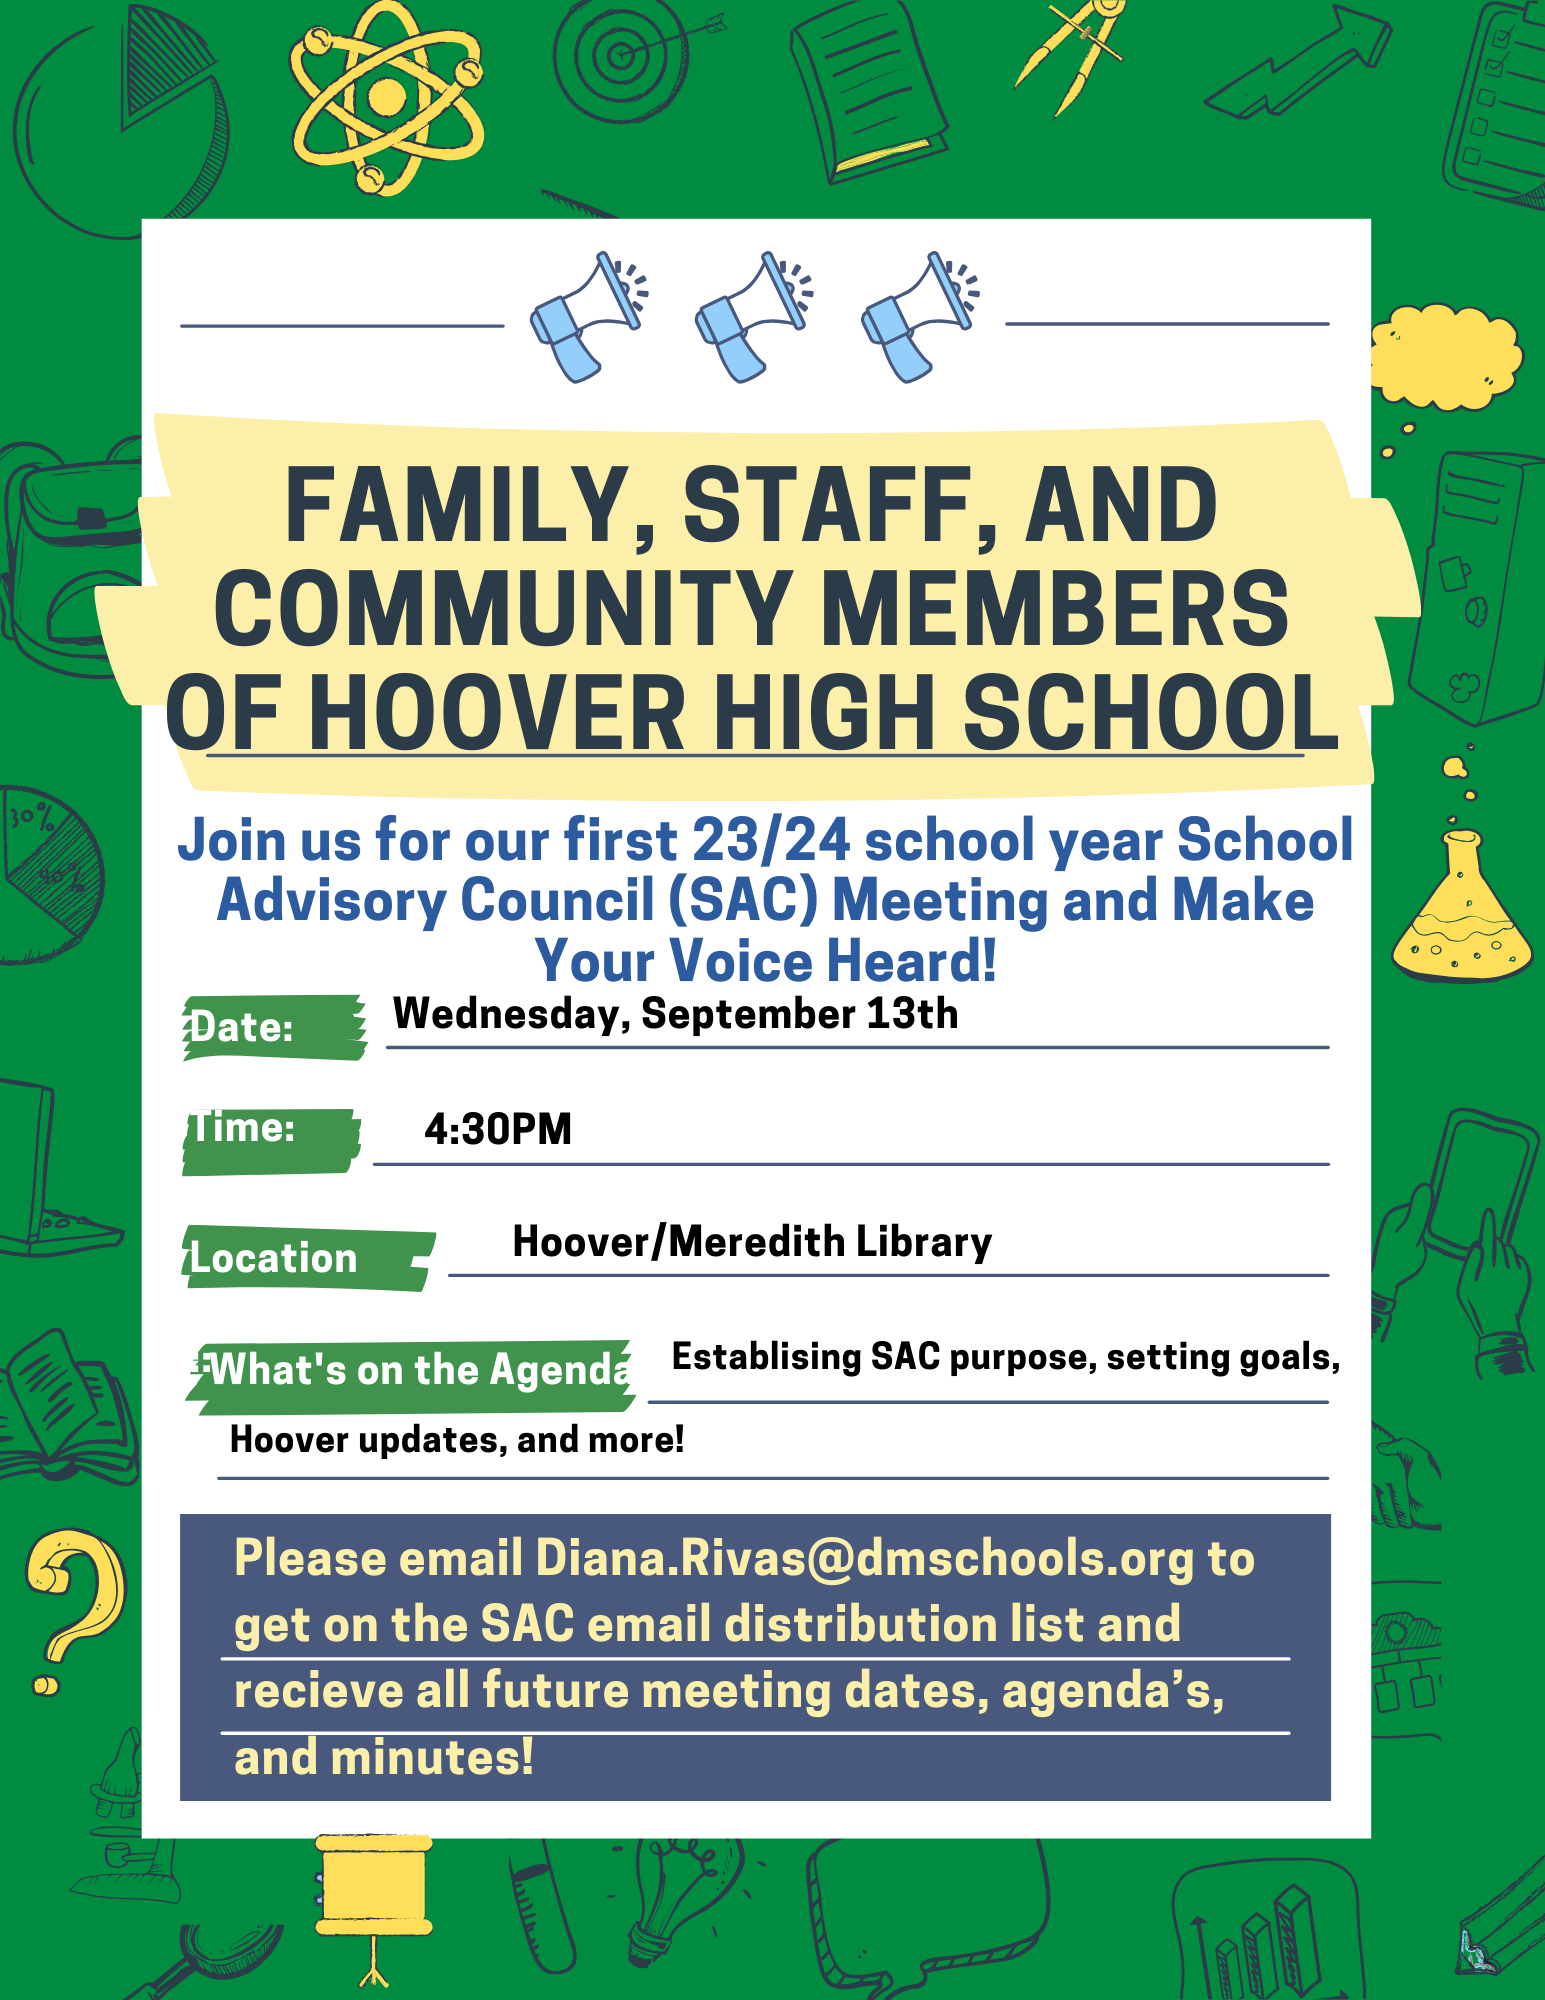 Join us for our next School Advisory Council (SAC) Meeting and Make Your Voice Heard!